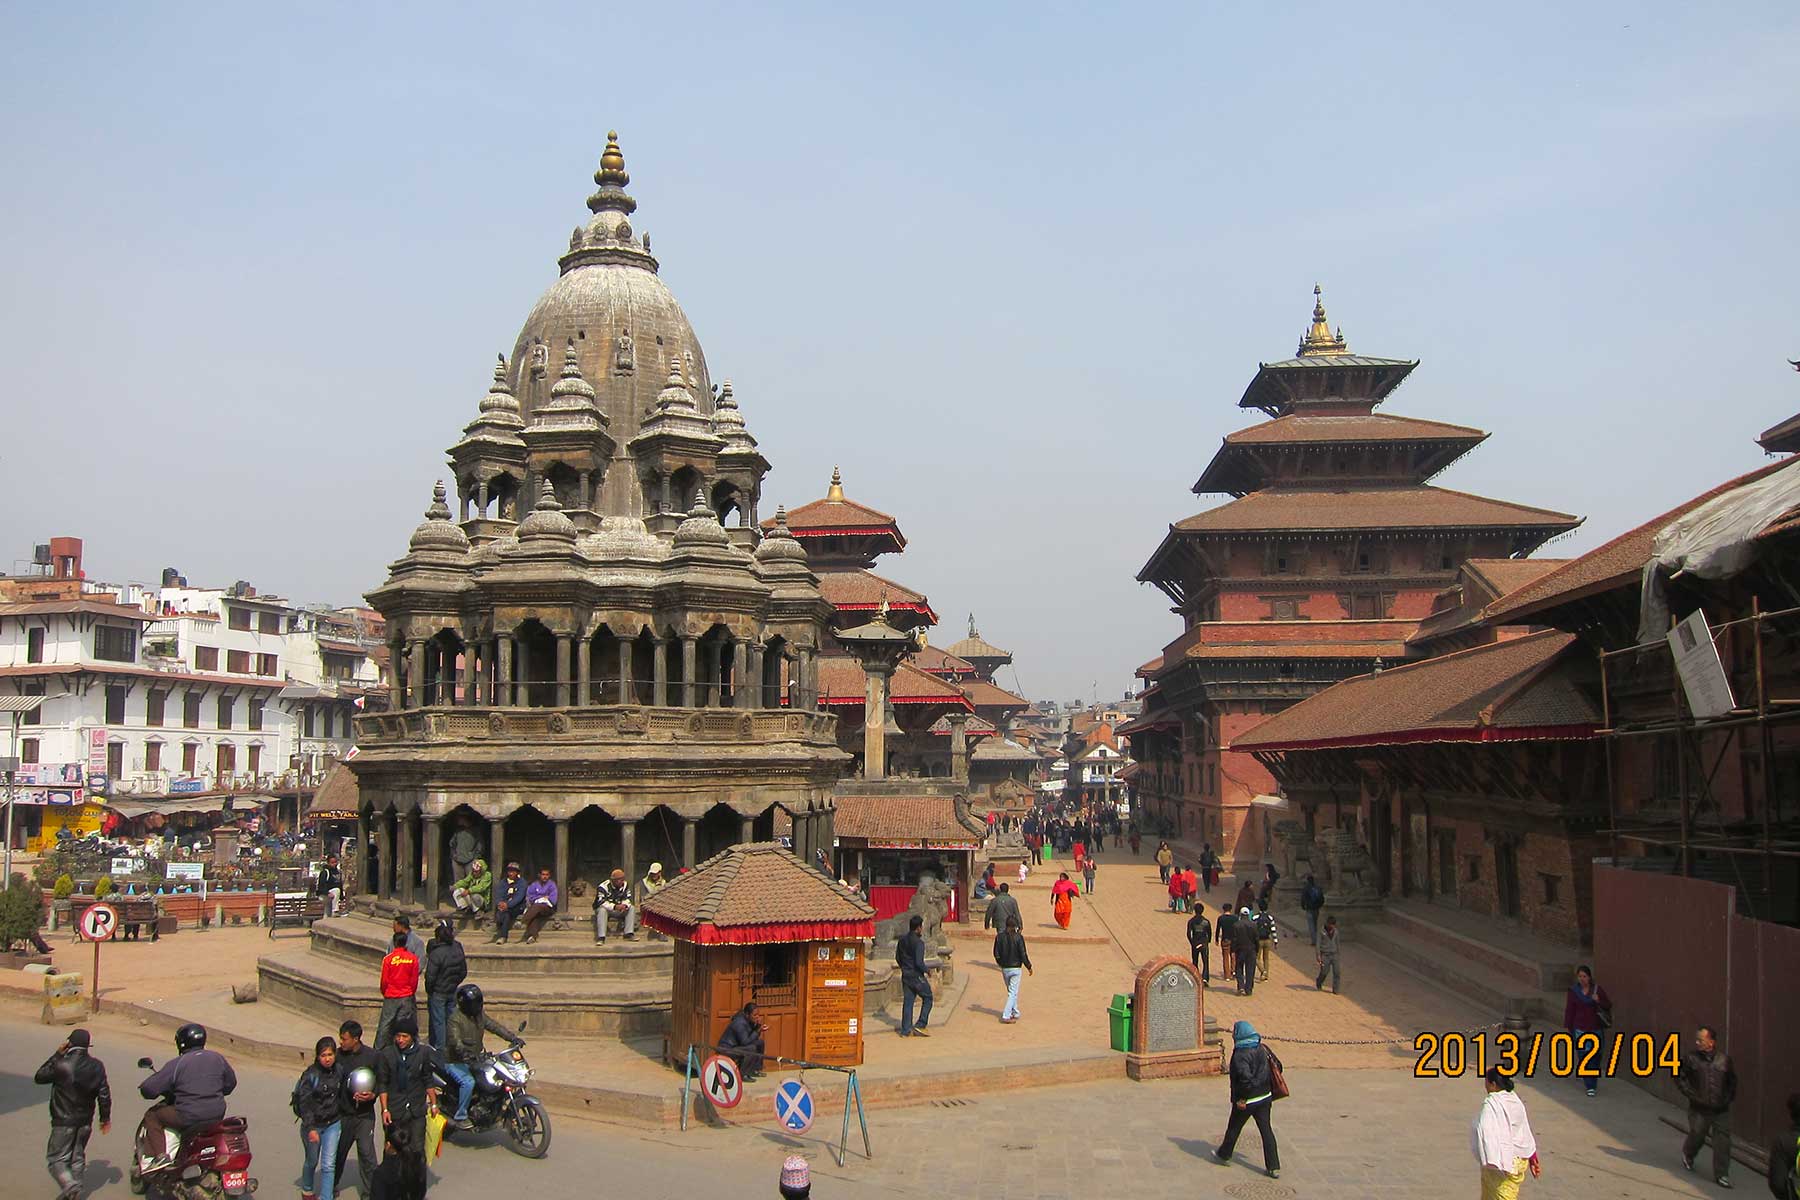 The old capital of Nepal